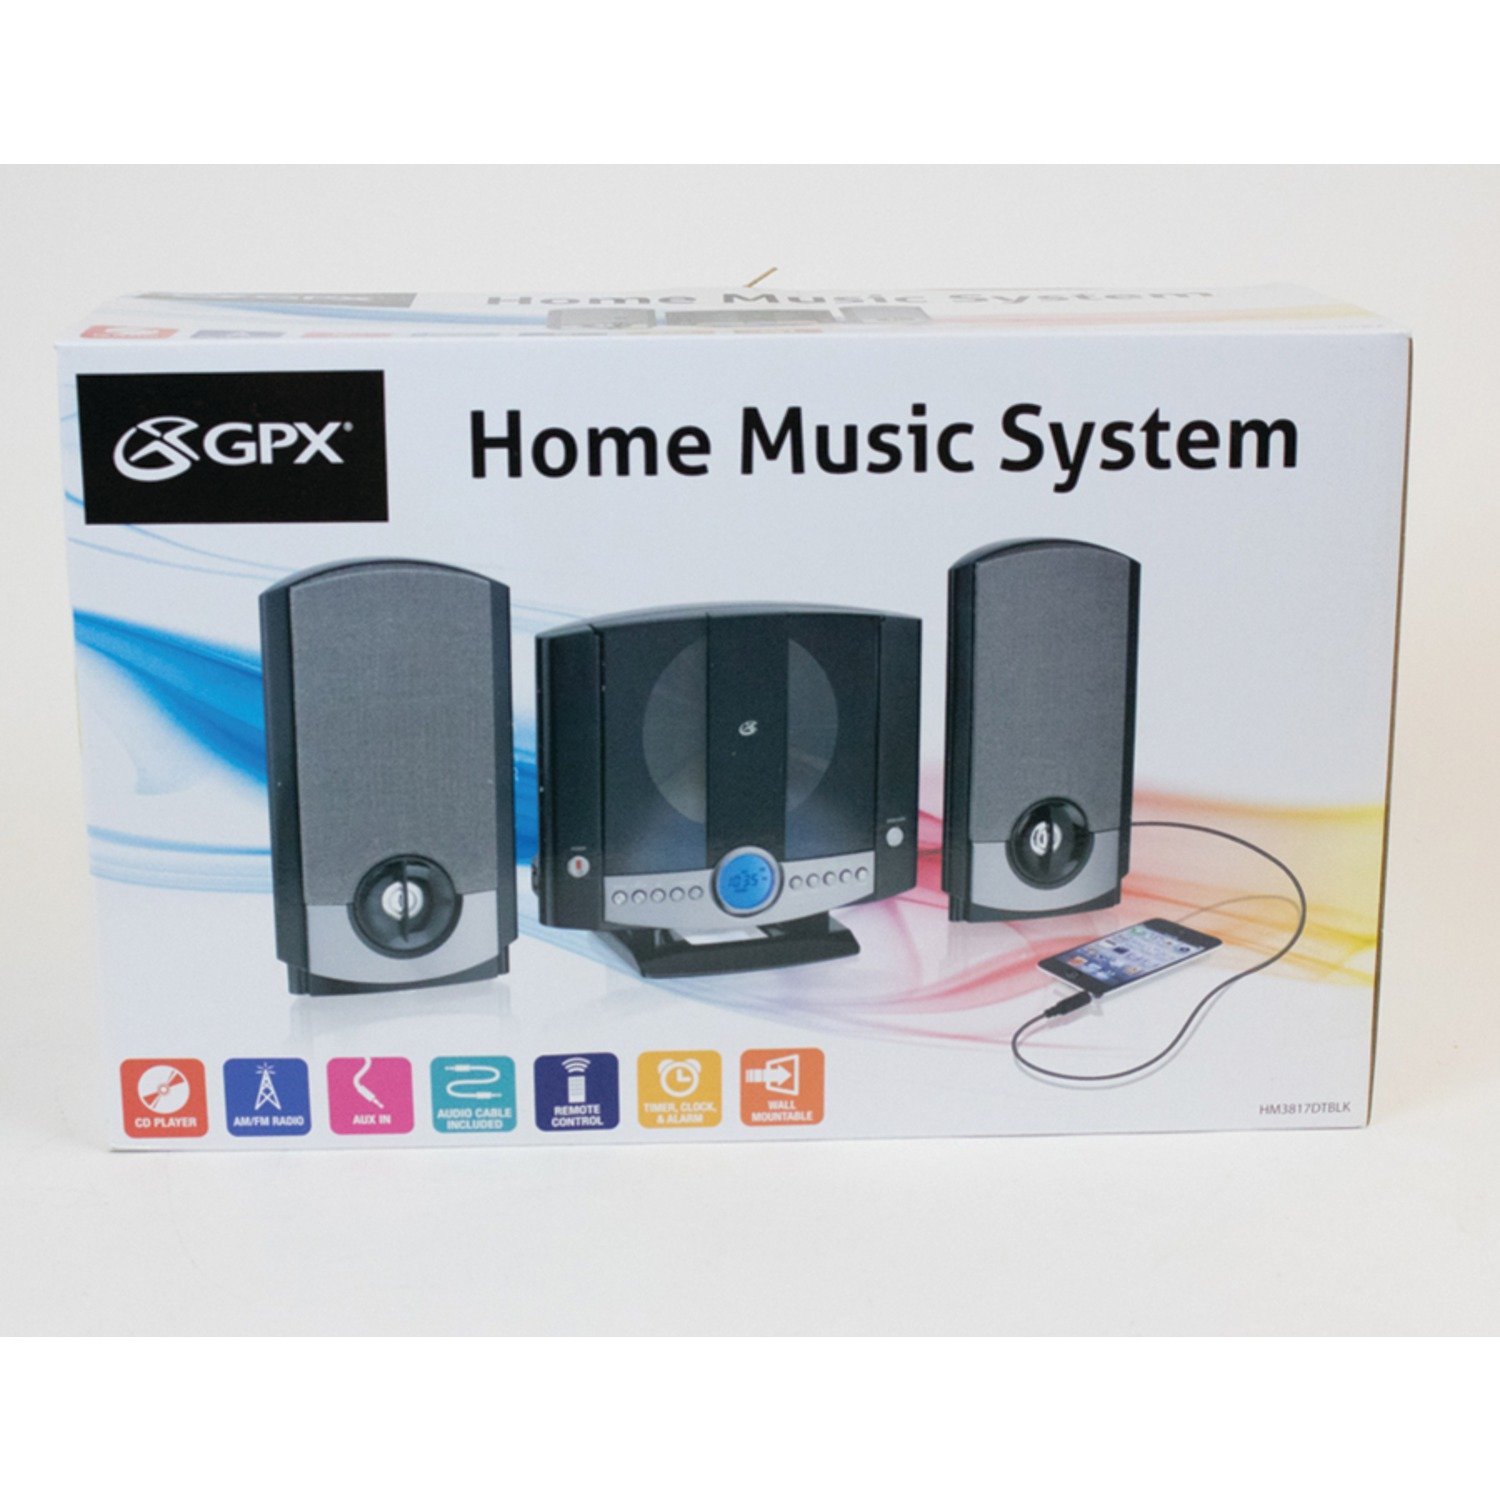 GPX HM3817DTBK Home Music System with Remote and AM/FM Radio black